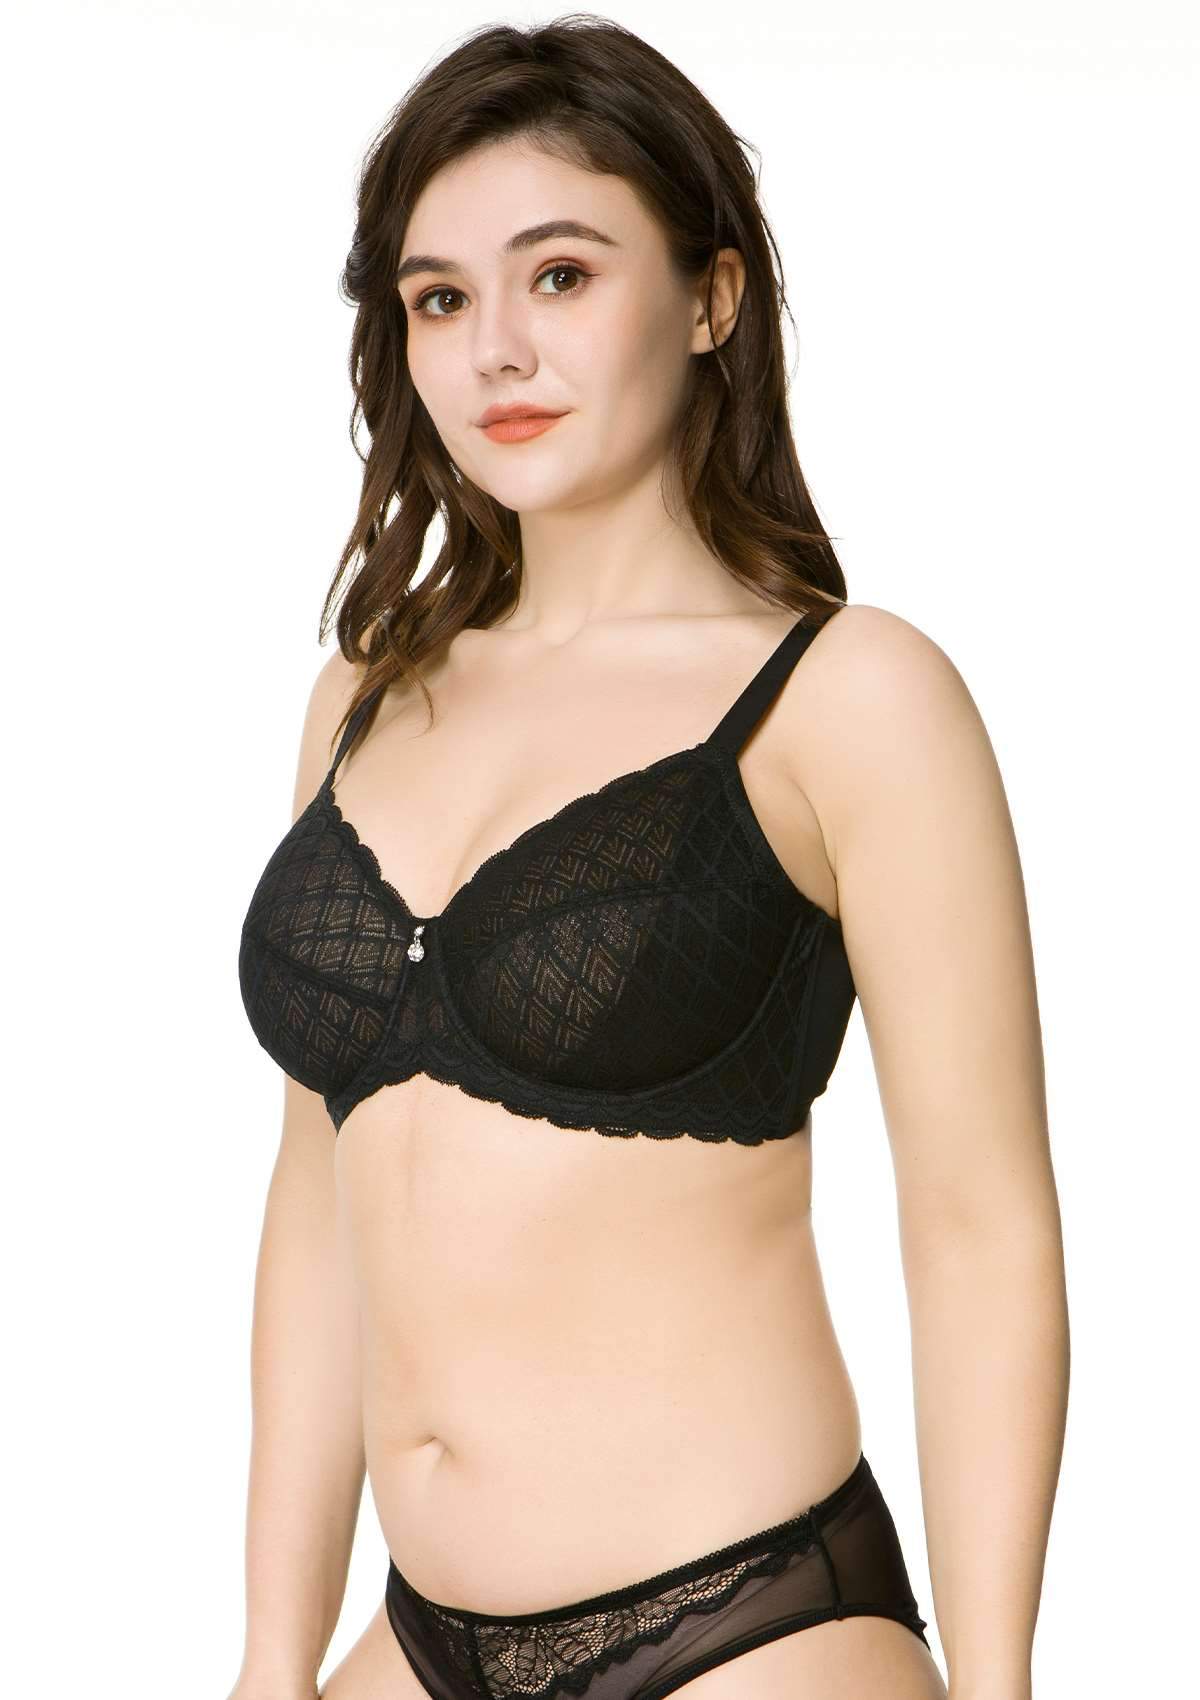 HSIA Plaid Full-Coverage Bra: Soft Bra With Thick Straps - Light Pink / 38 / D